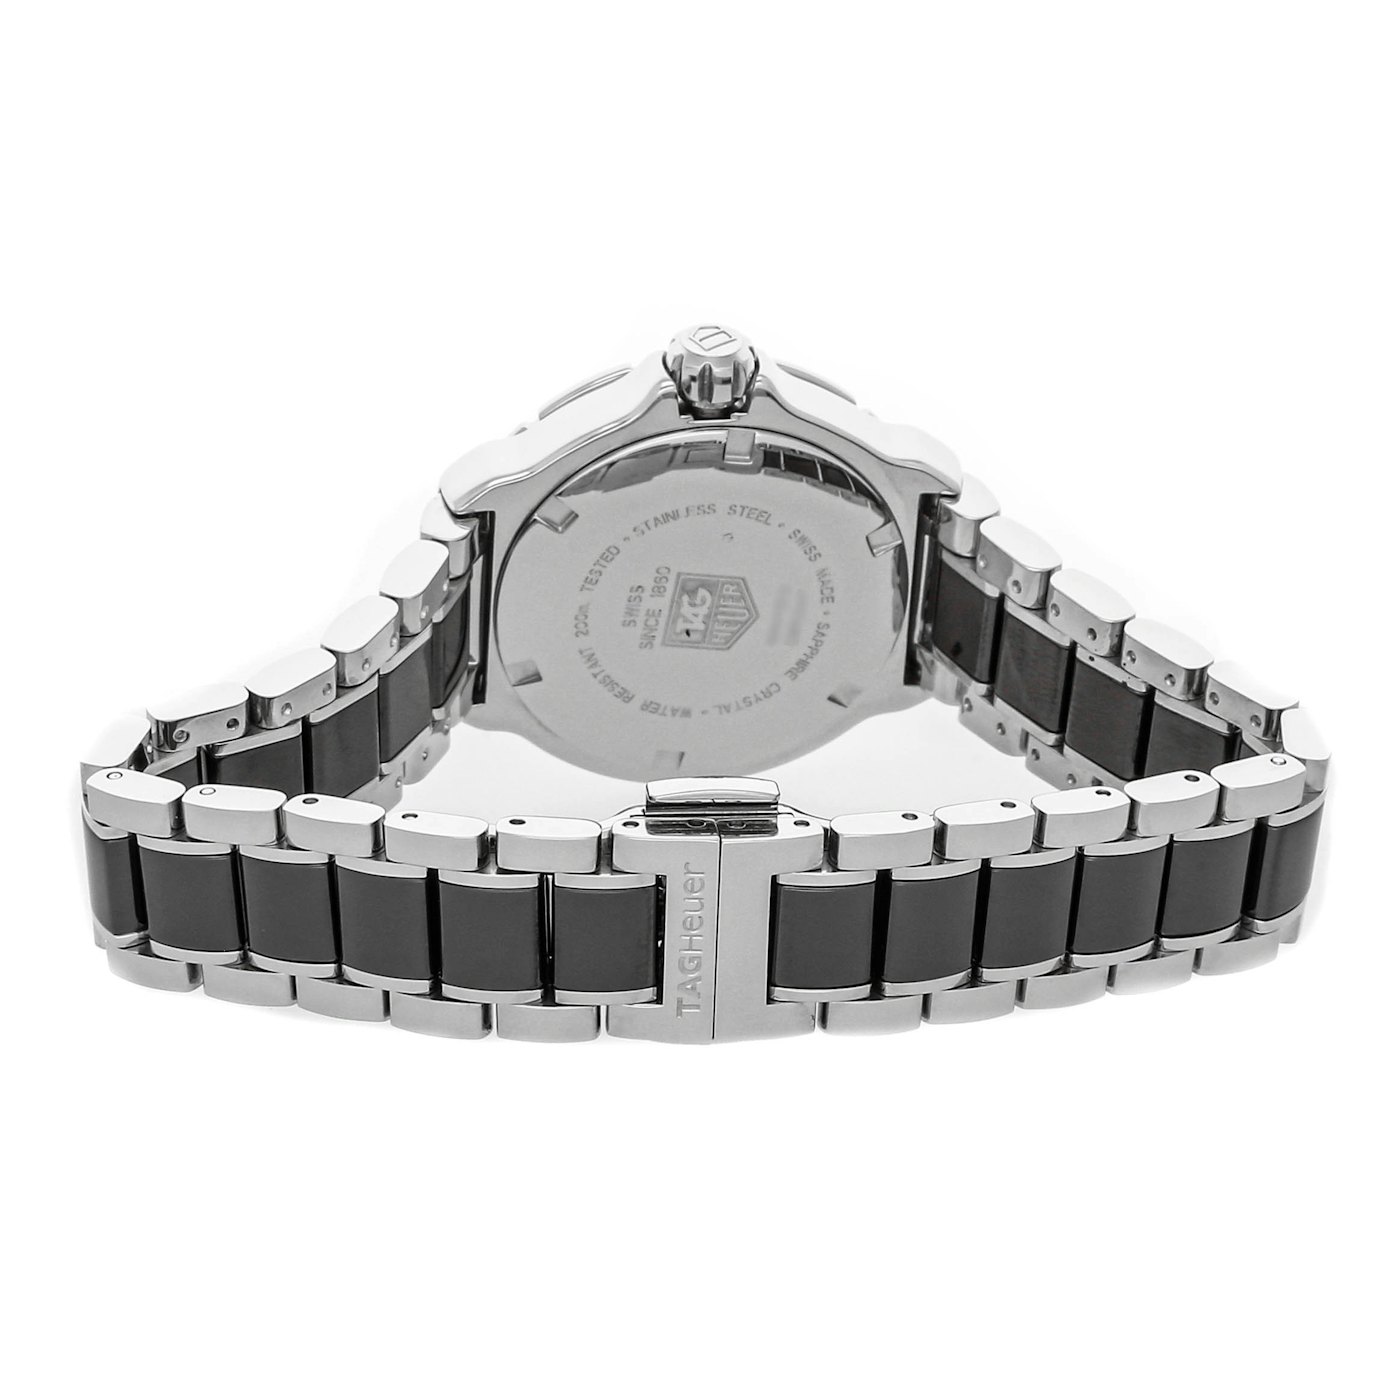 tag-heuer-wah1212-cheapest-online-save-43-jlcatj-gob-mx